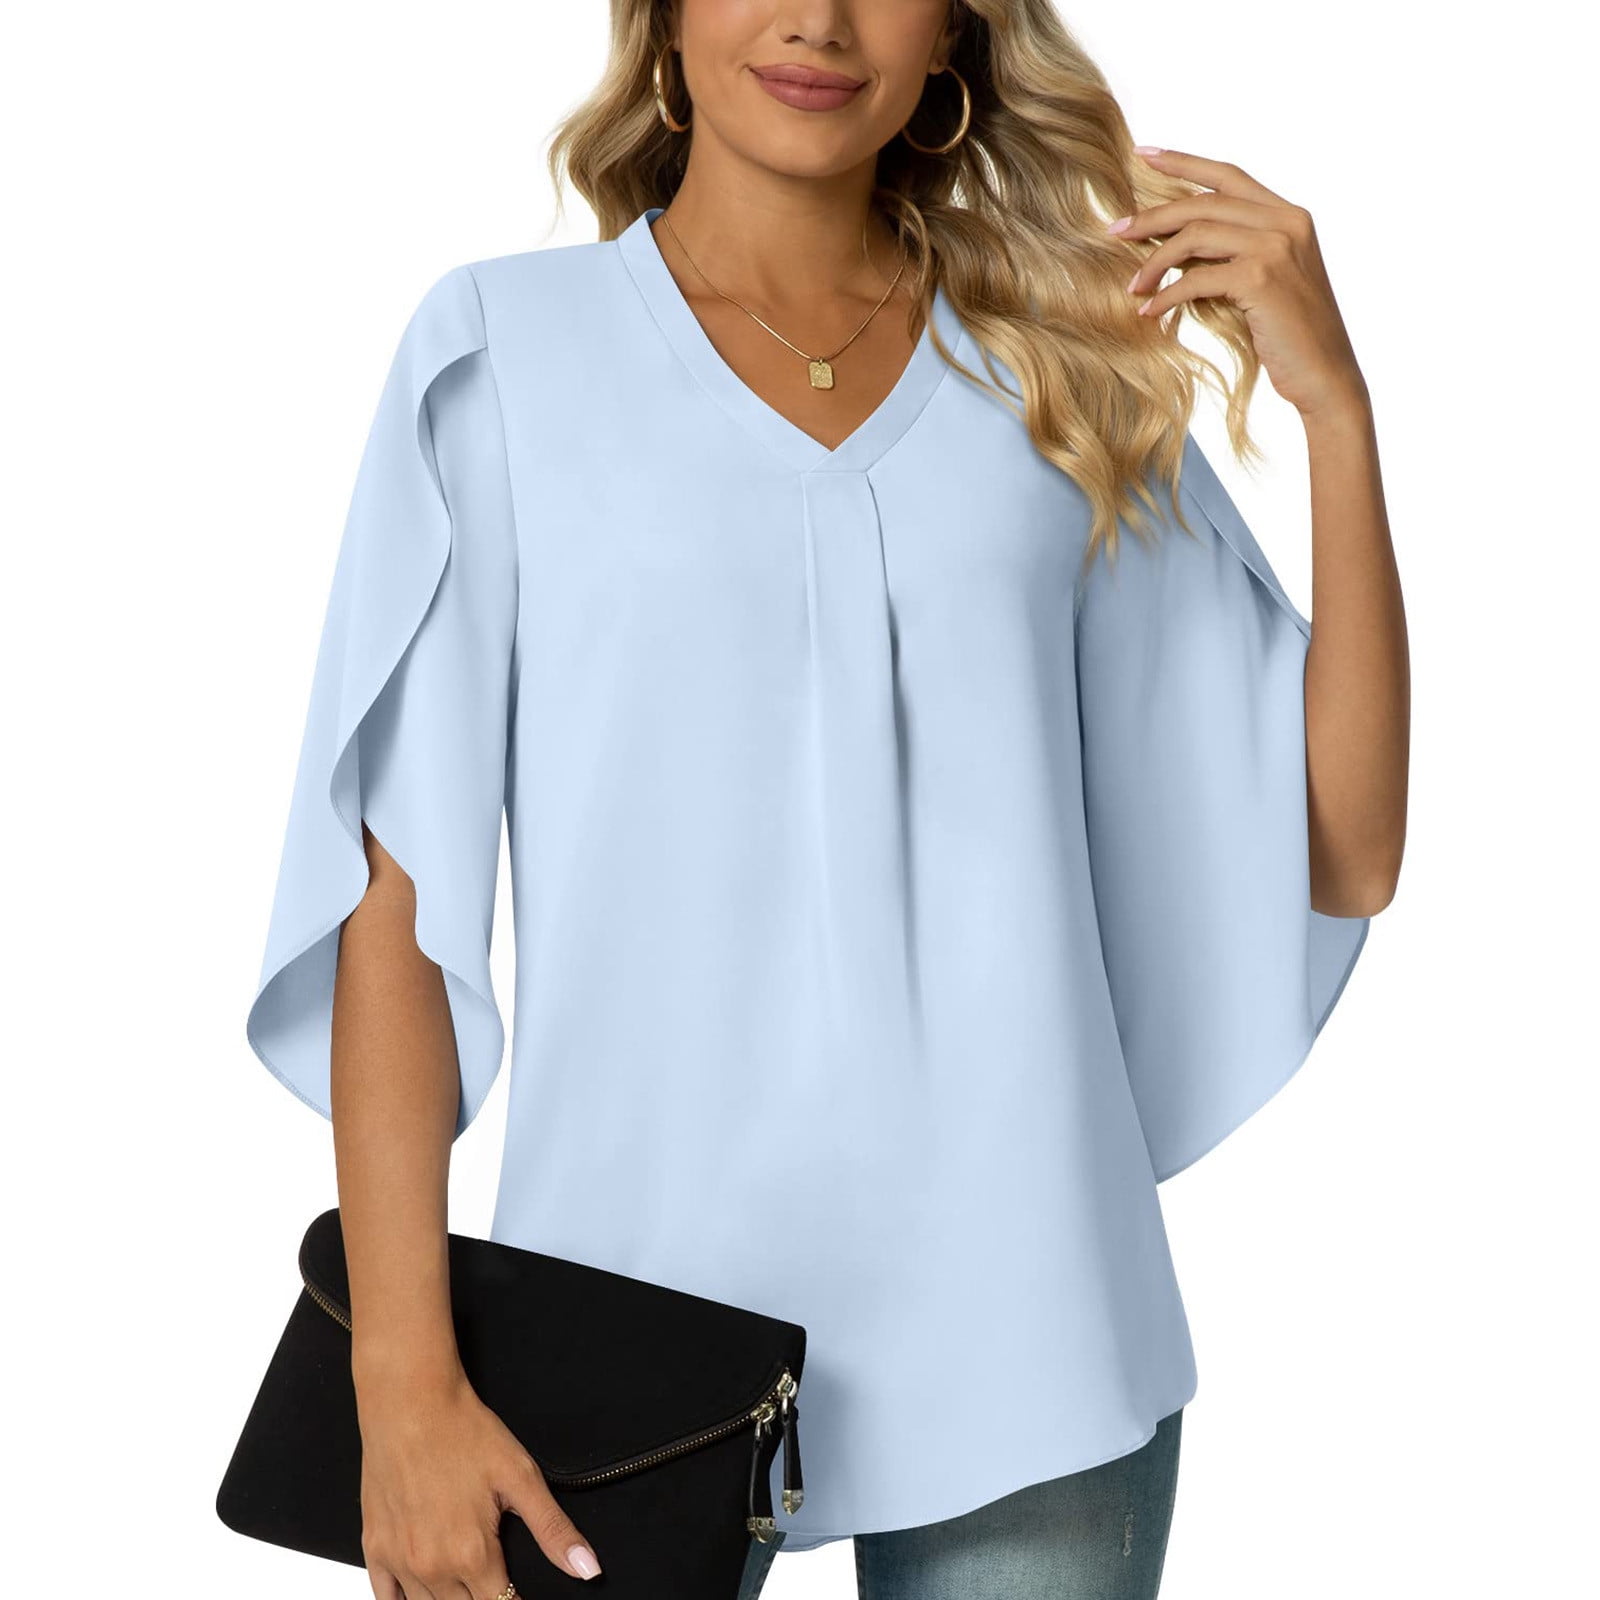 Usmixi Cute Tops for Women Elbow-Length V-Neck Solid T shirts Summer ...